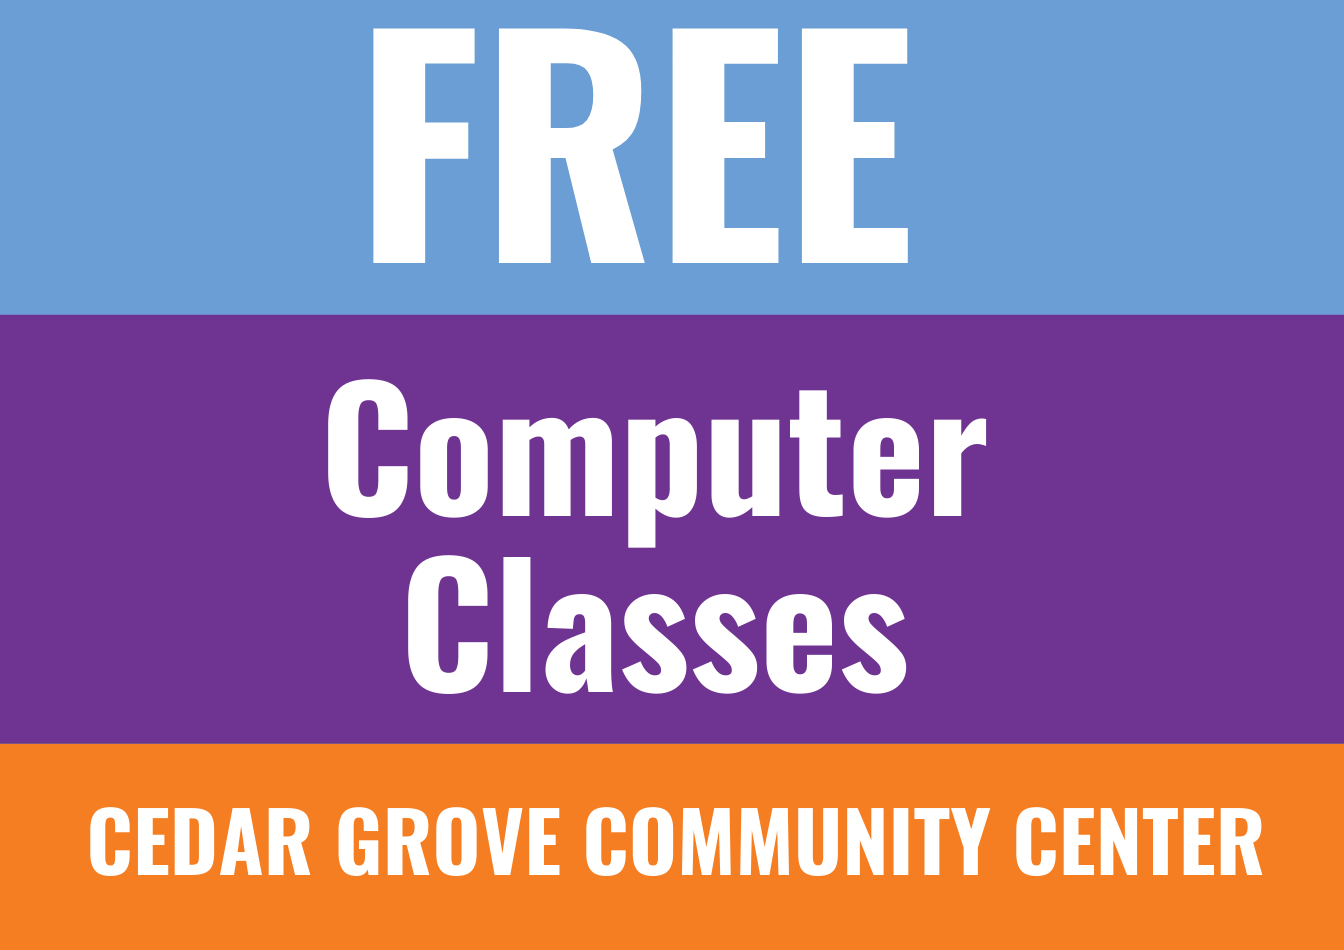 Tri-colored flyer with text:  FREE Computer Classes Cedar Grove Community Center 